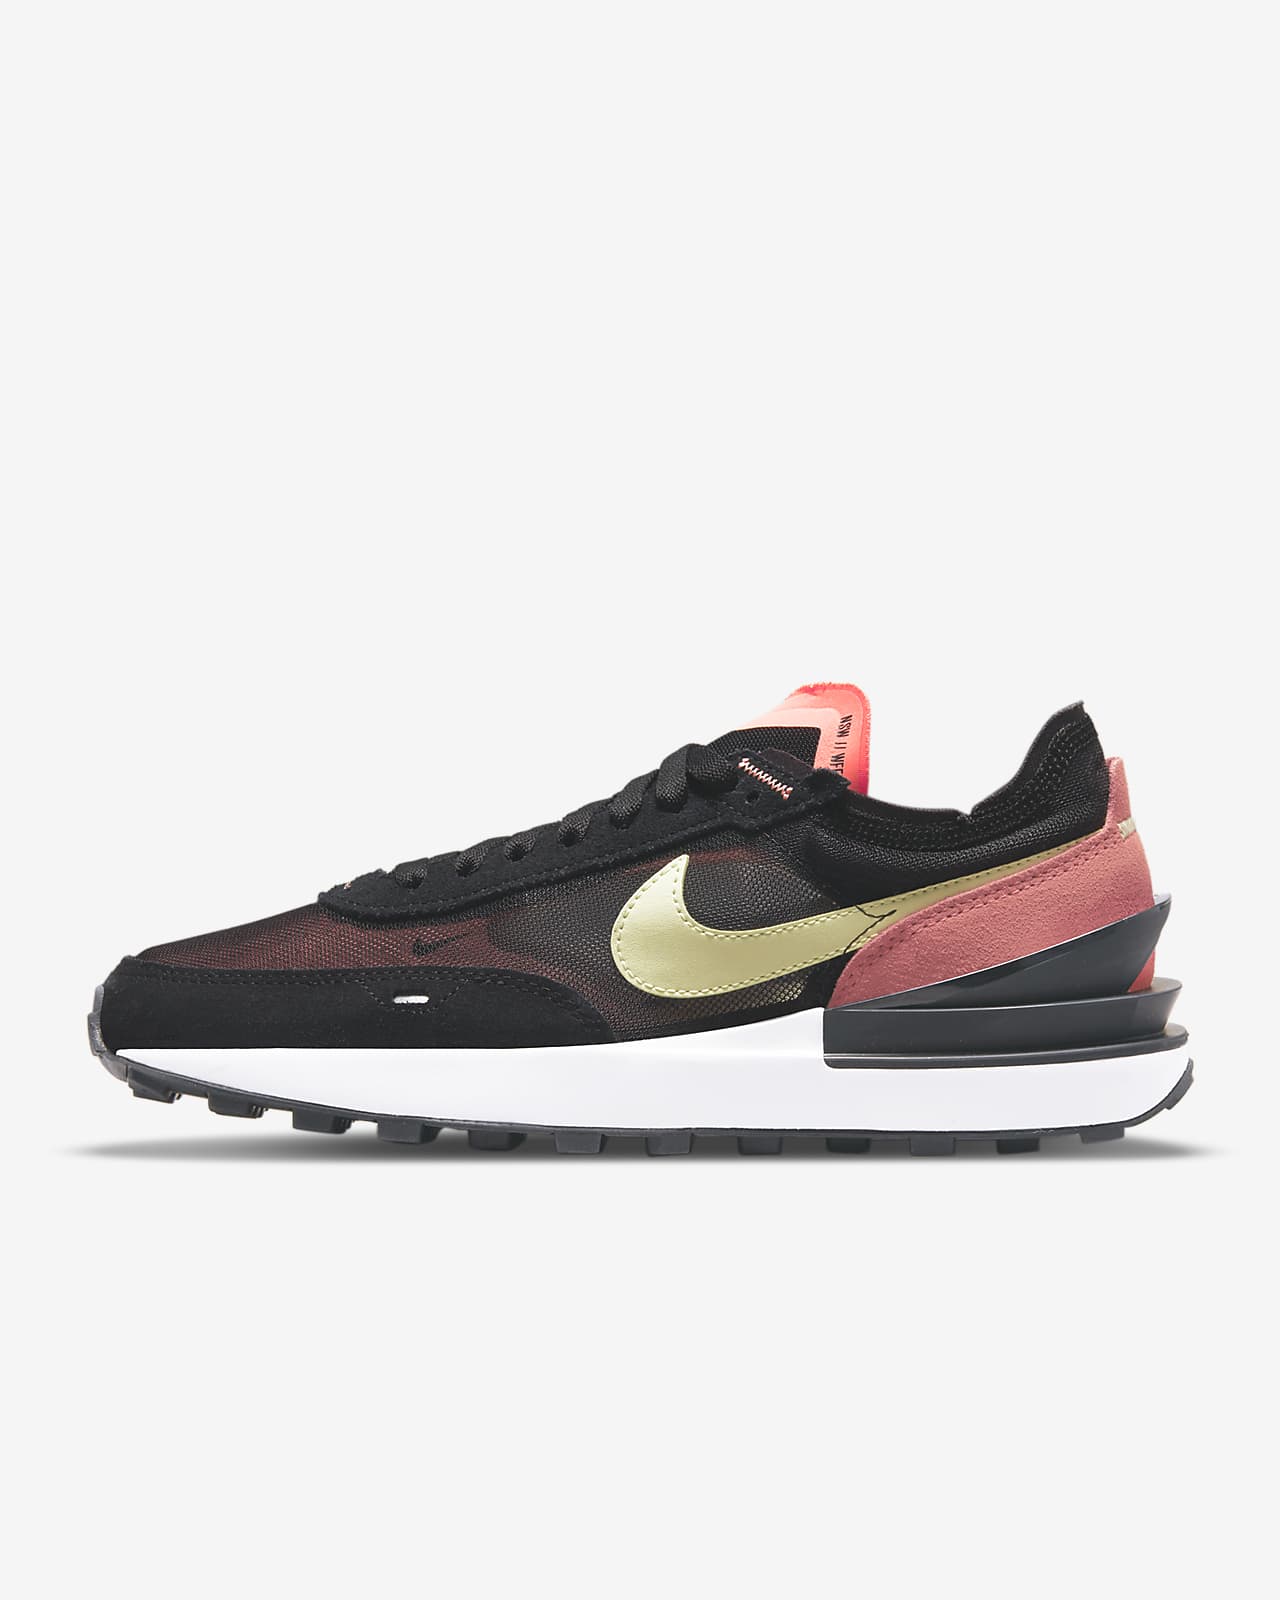 Chaussures Nike Waffle One pour Femme